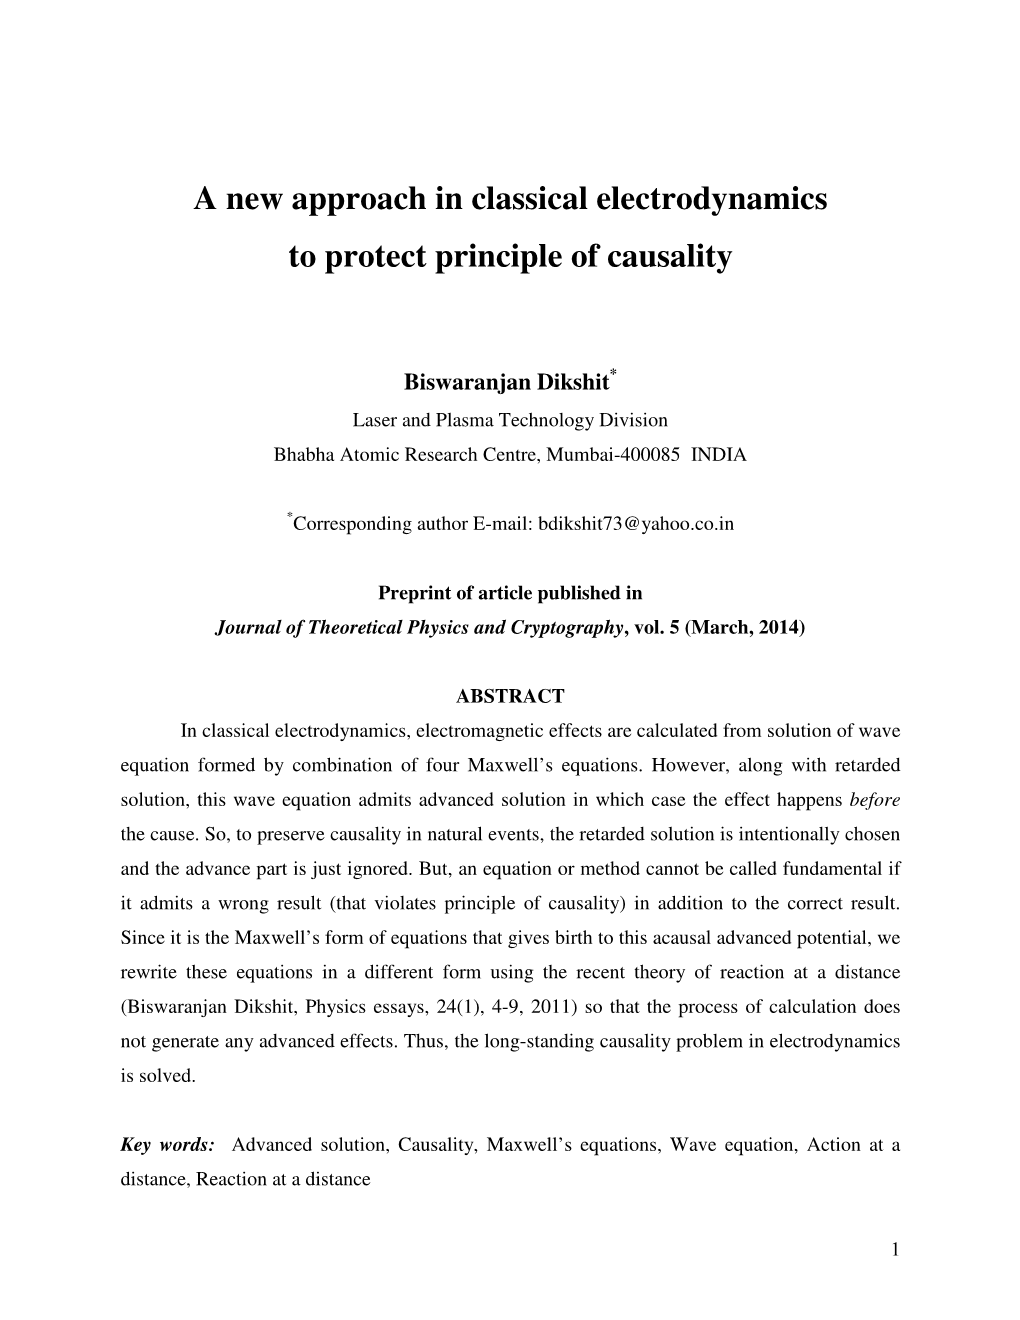 A New Approach in Classical Electrodynamics to Protect Principle of Causality